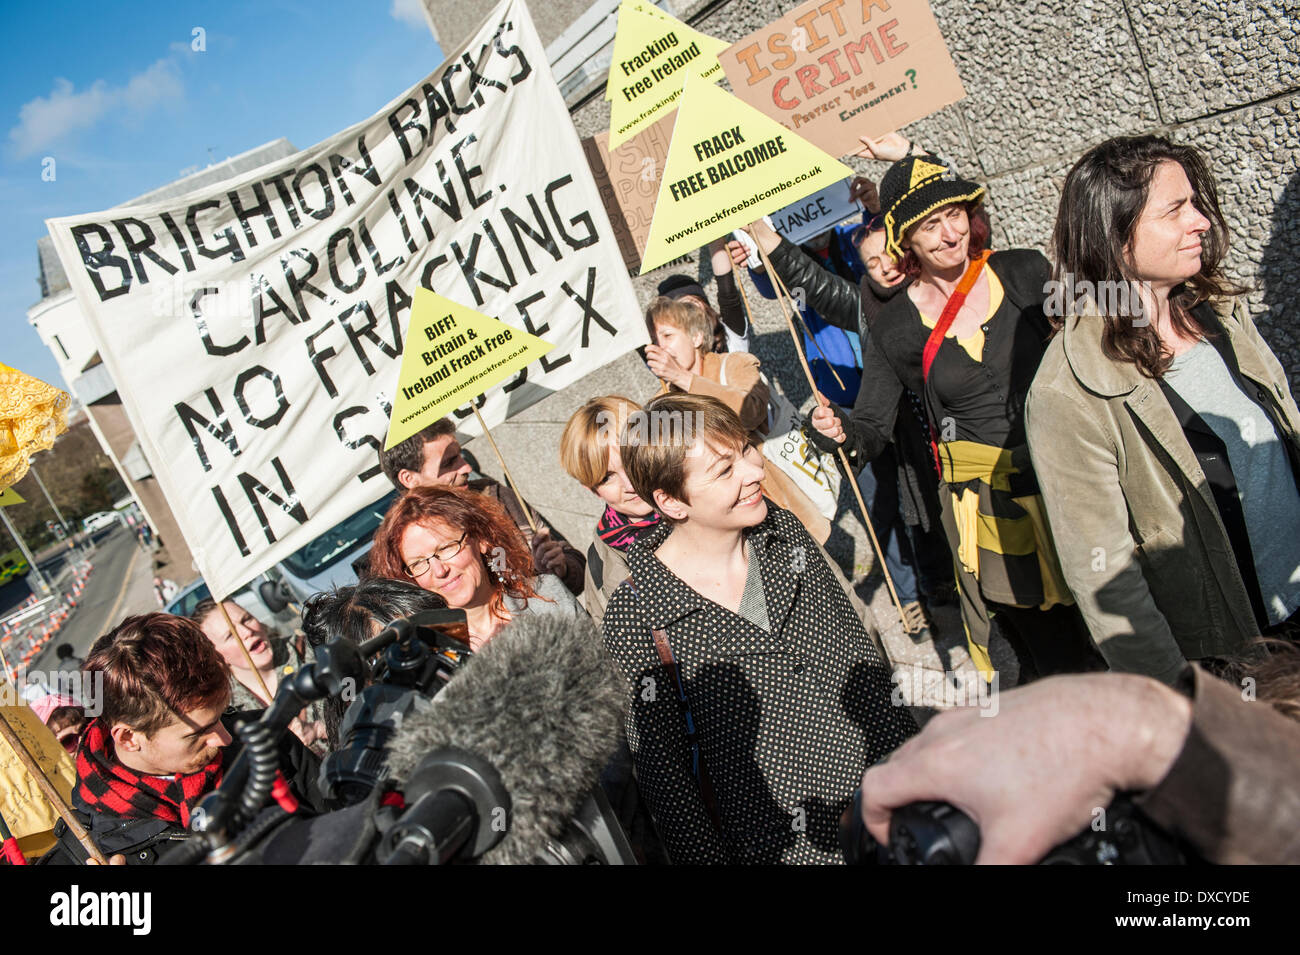 Brighton, Sussex, UK. 24th March 2014. Caroline Lucas, Green Party MP for Brighton Pavillion, arriving at Brighton Magistrates Court for day one of the trial following her arrest last August at the anti-fracking protests at Balcombe. Caroline Lucas was taking part in a peaceful direct action protest against fracking. She was charged, with four others, for obstructing the highway and failing to follow police instructions to move to a specified protest area. Caroline Lucas MP states on her blog that they will all plead not guilty. Credit:  Francesca Moore/Alamy Live News Stock Photo